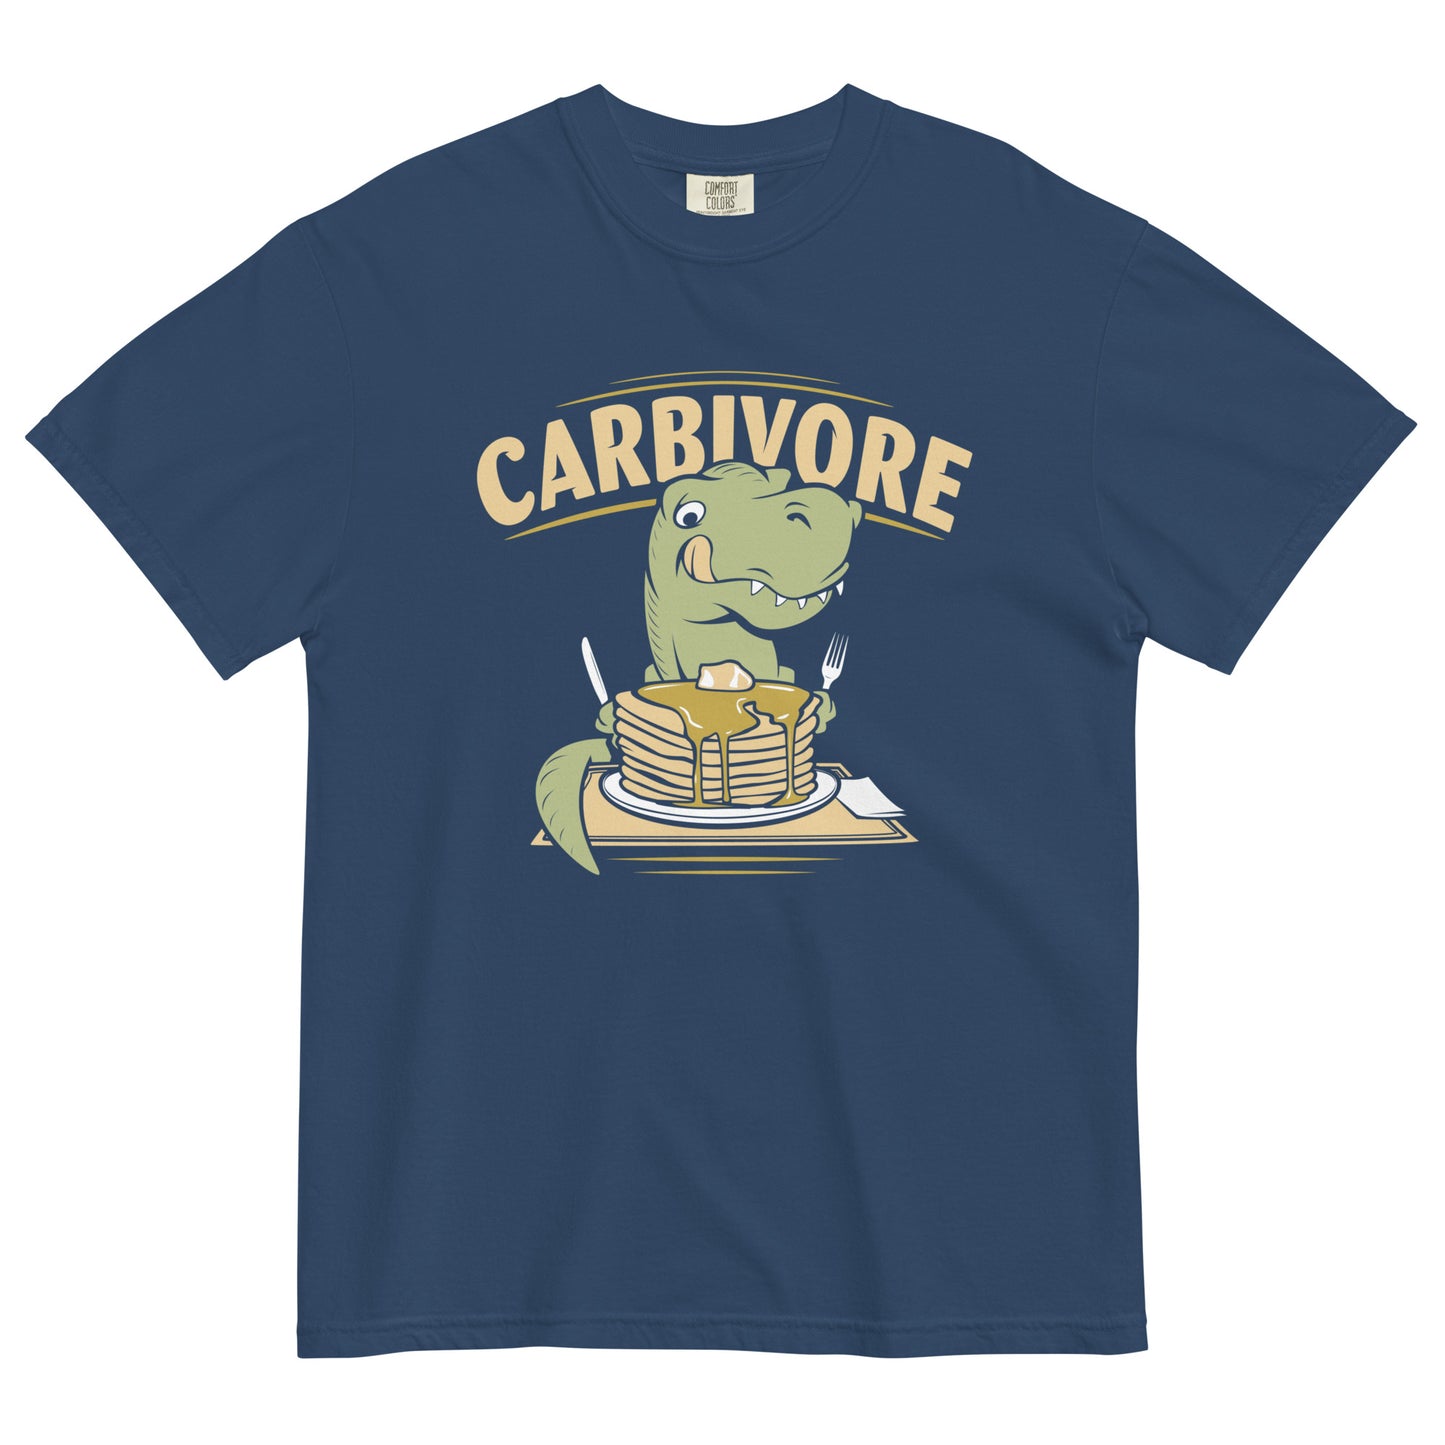 Carbivore Men's Relaxed Fit Tee